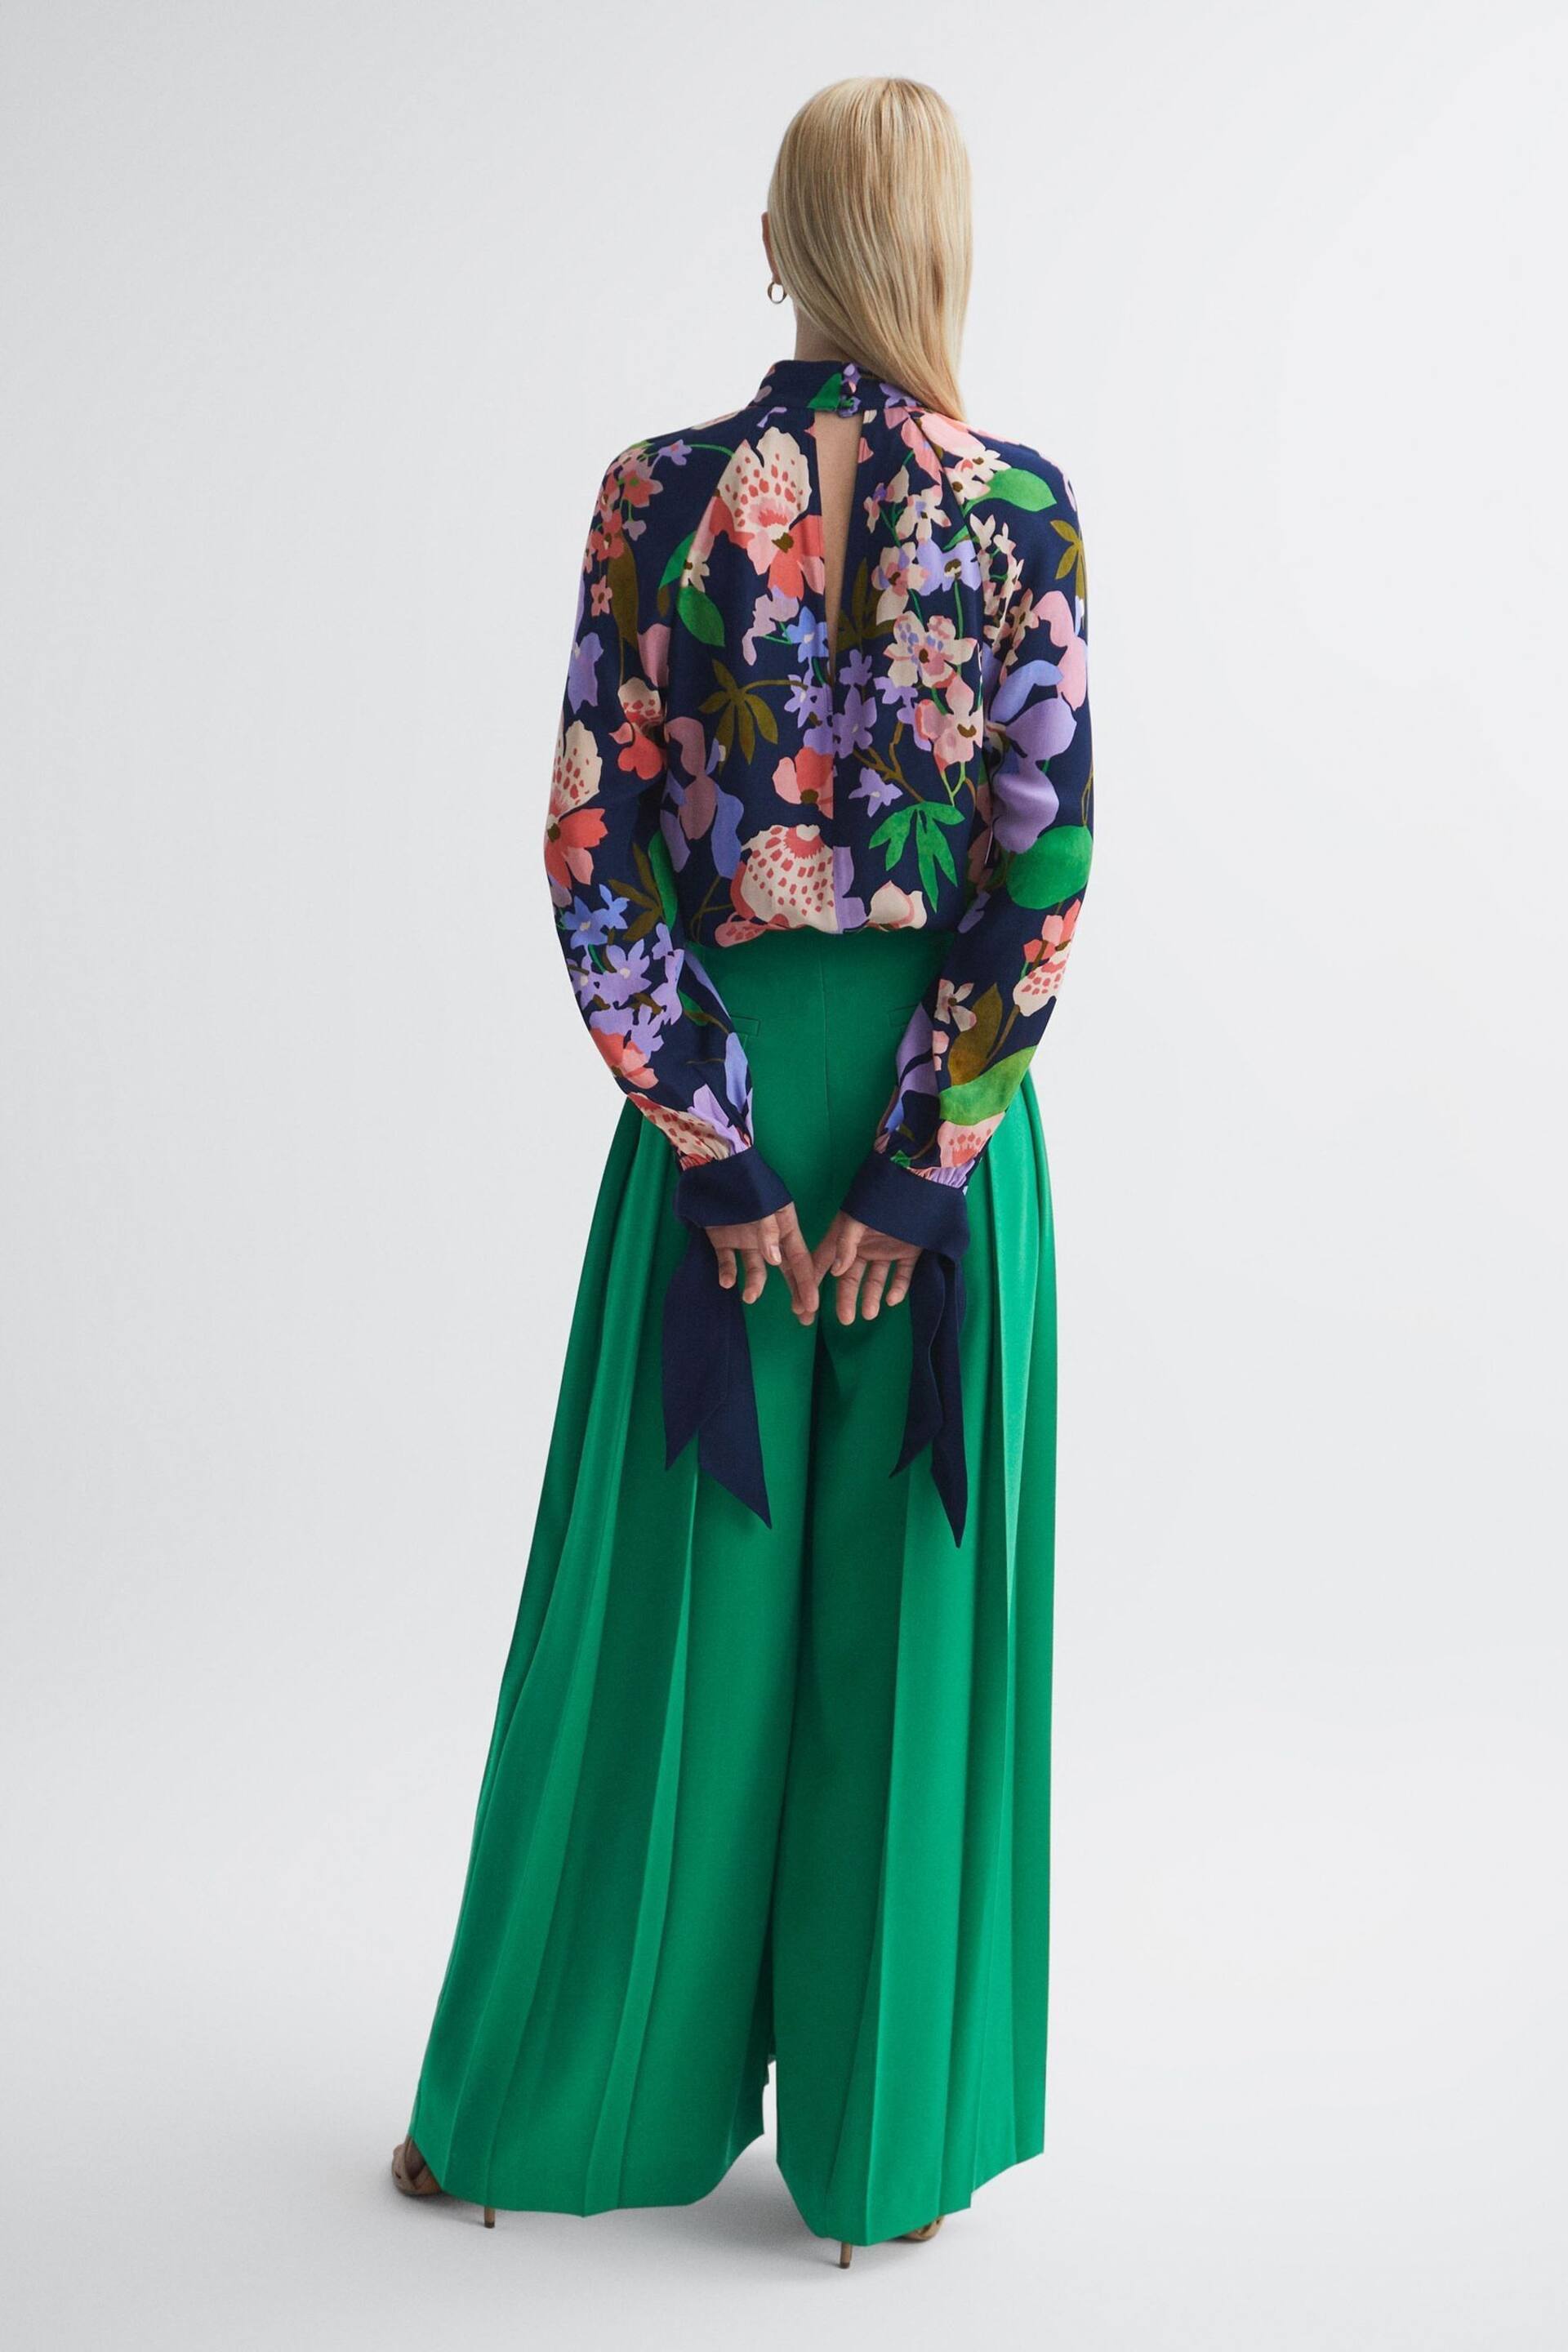 Florere Floral Long Sleeve Blouse - Image 4 of 5